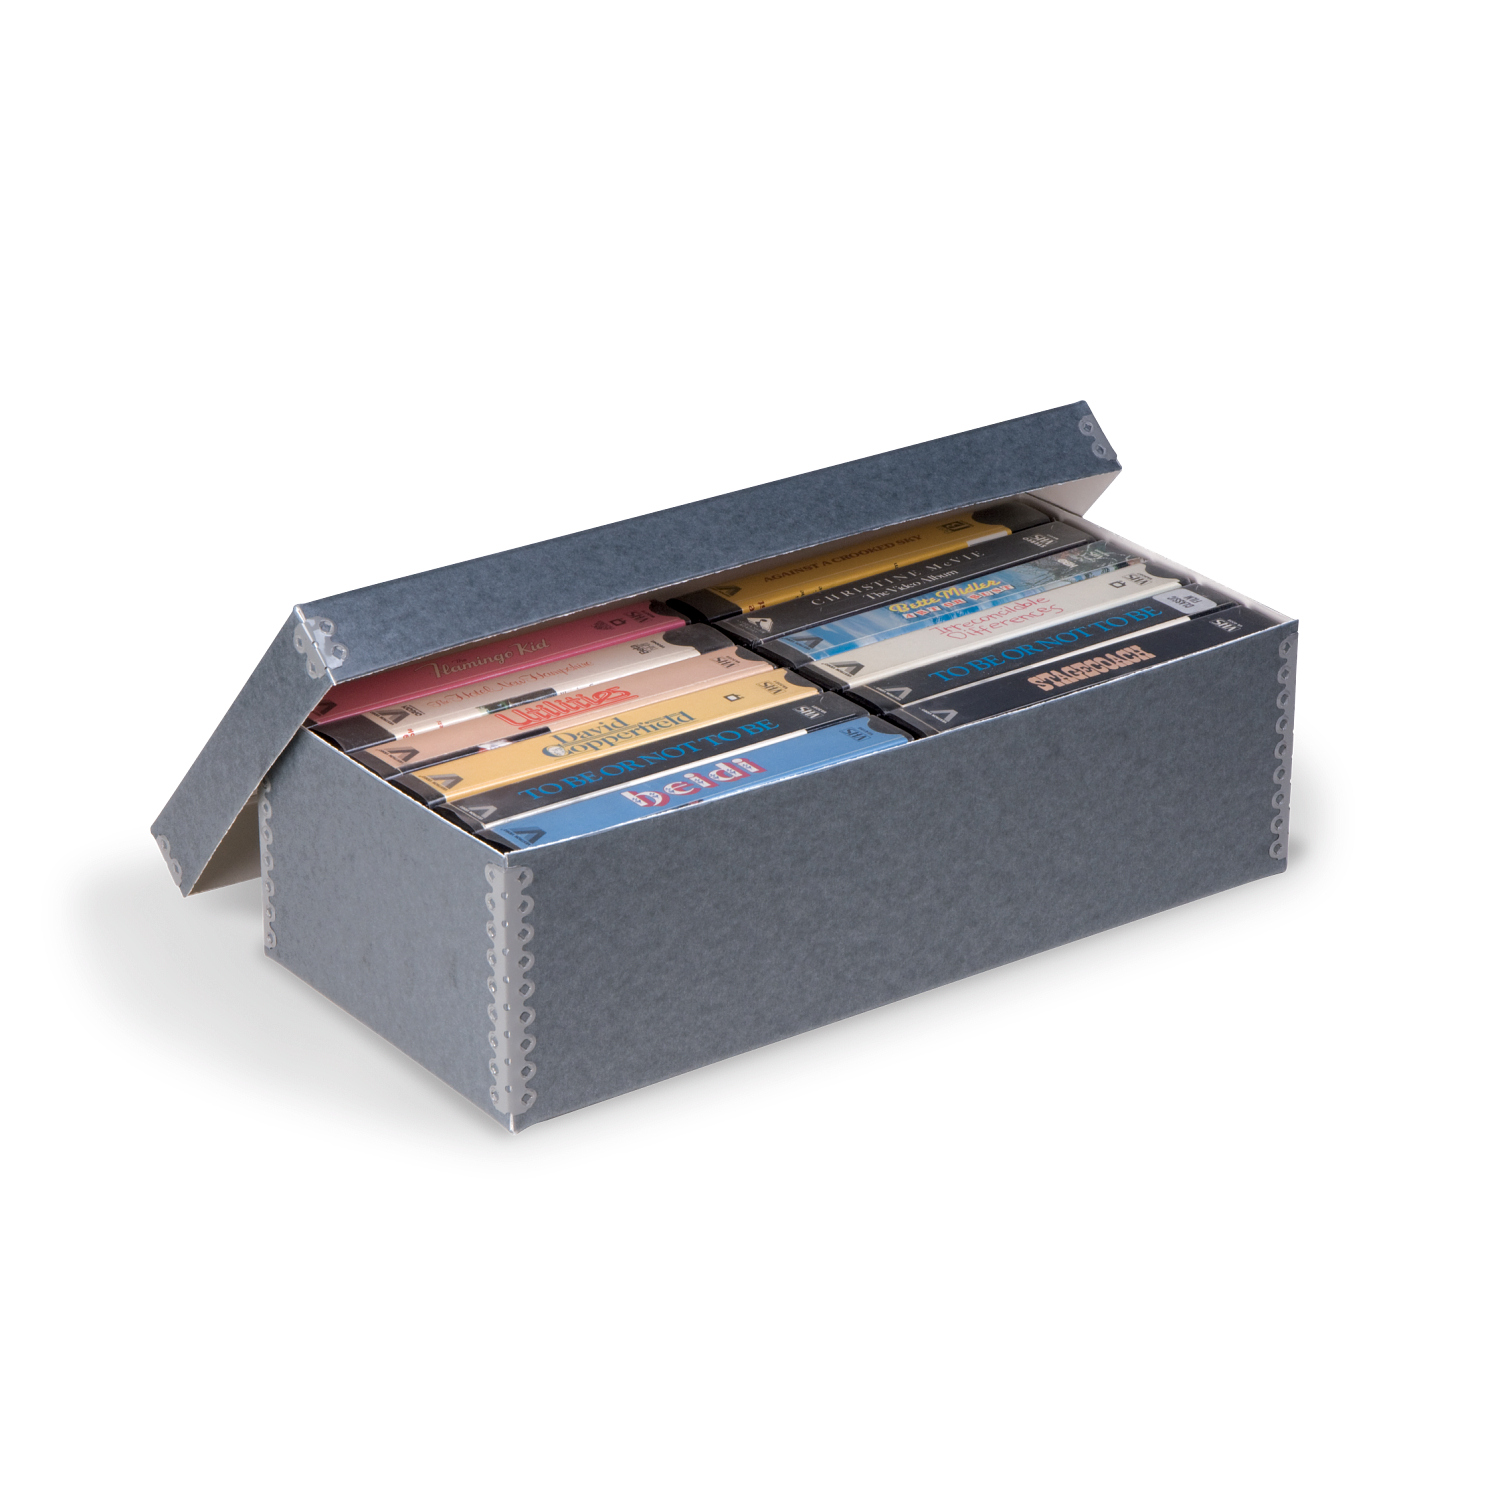 Gaylord Archival Videocassette Storage Box - Holds Up To 30 VHS Tapes  Without Cases!